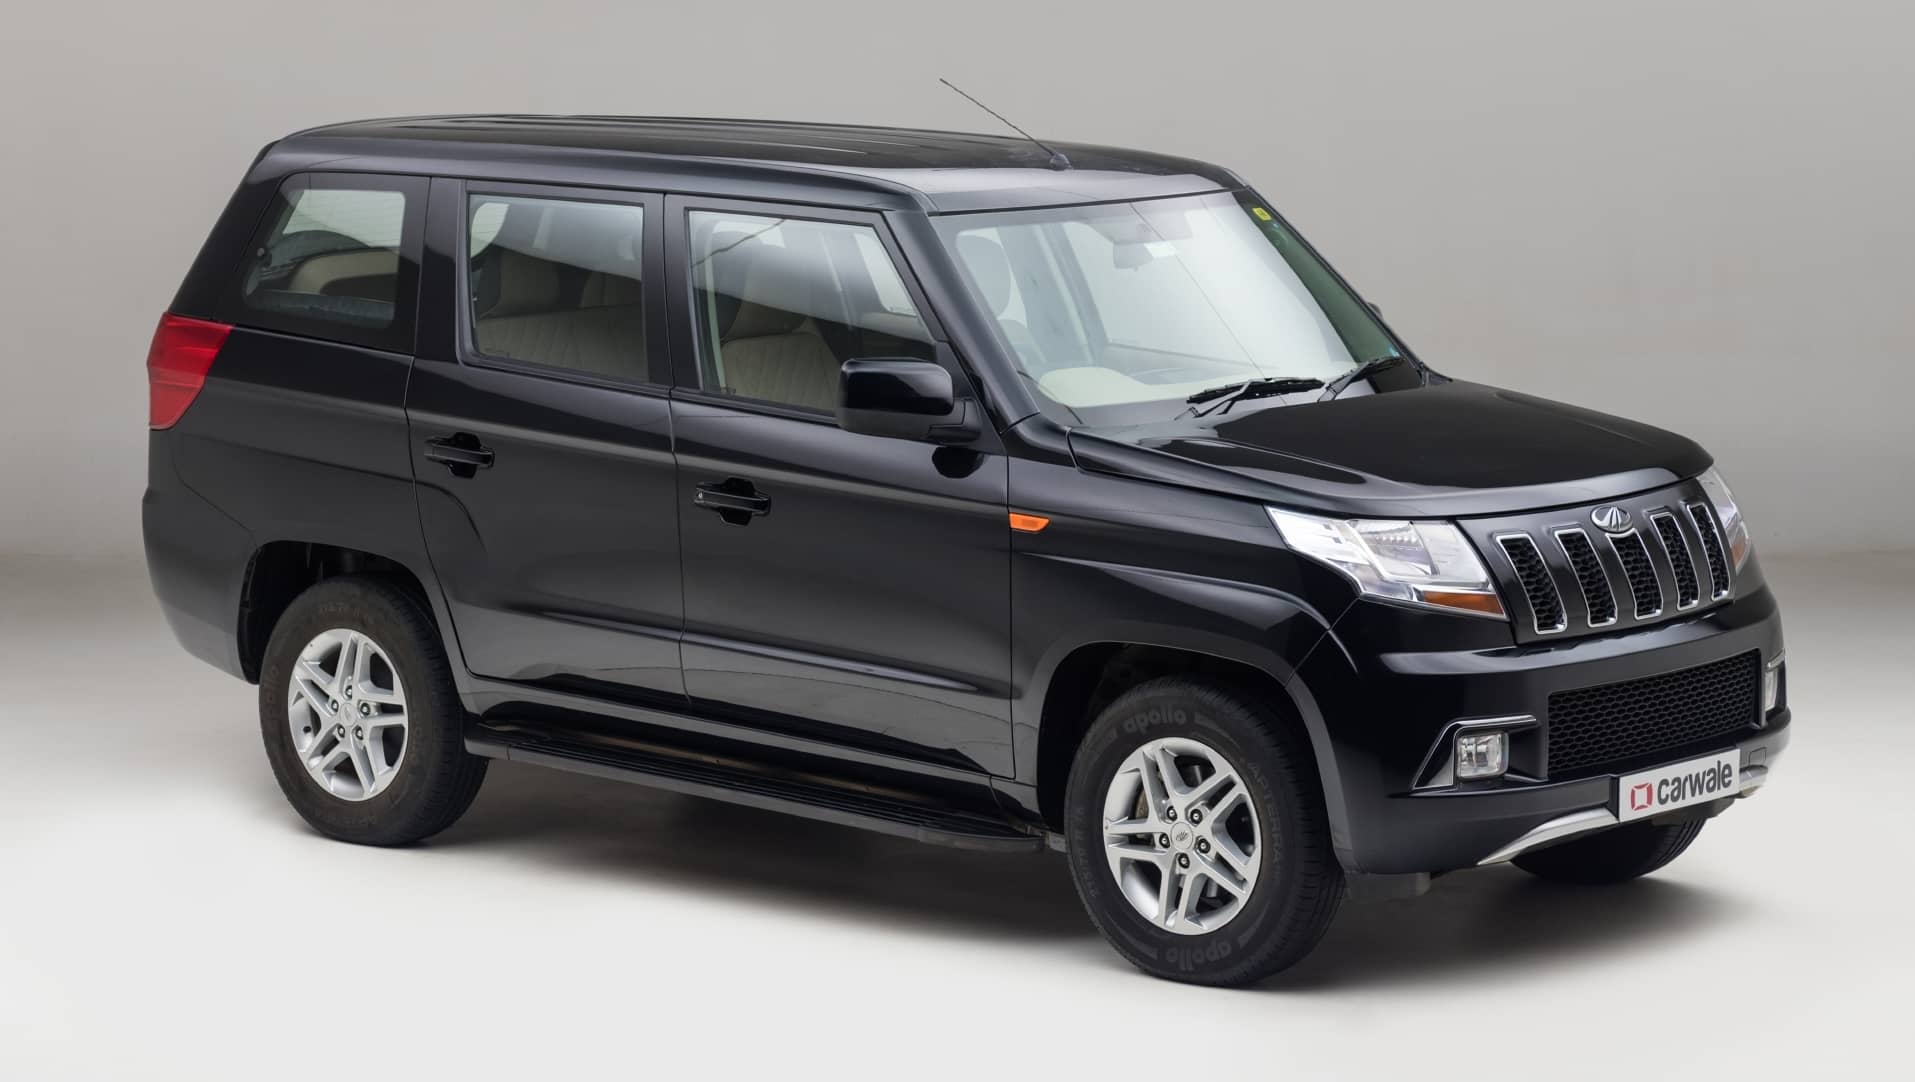 Top 9/10 Seater Vehicles in India: List of 9/10 Seater Cars in India